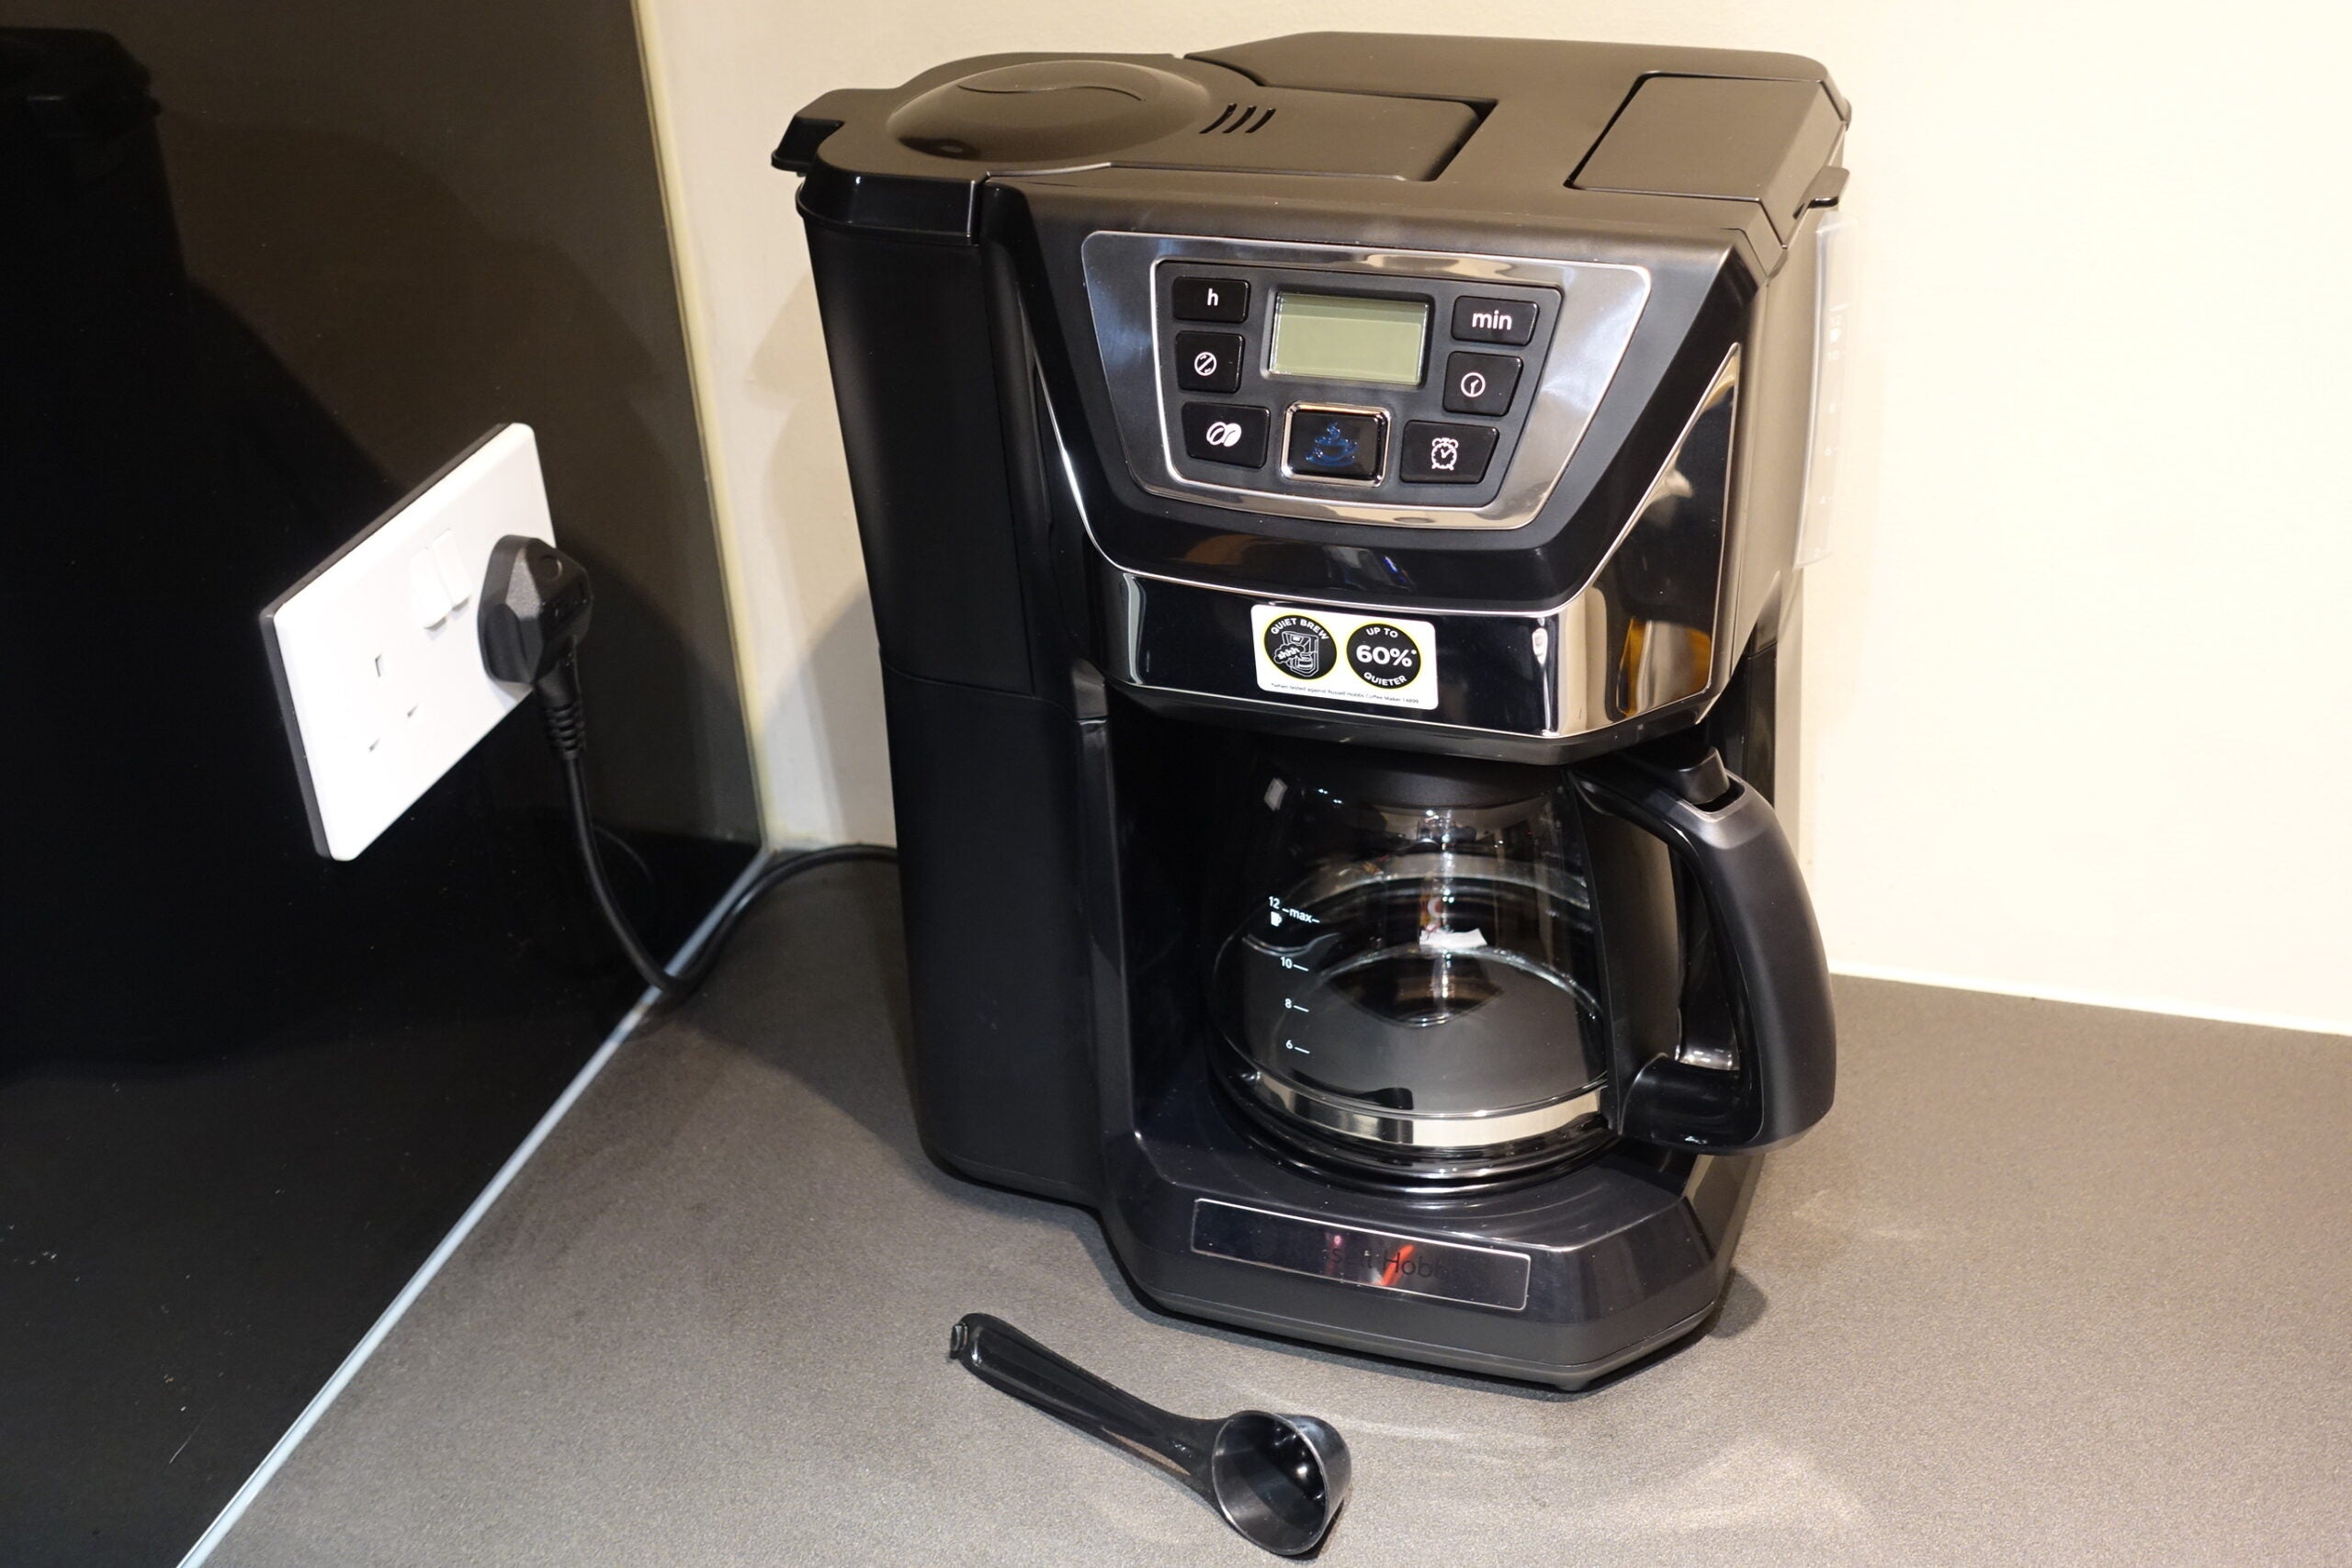 Russell Hobbs Grind & Brew 22000 Coffee Machine in Black**FREE DELIVERY**